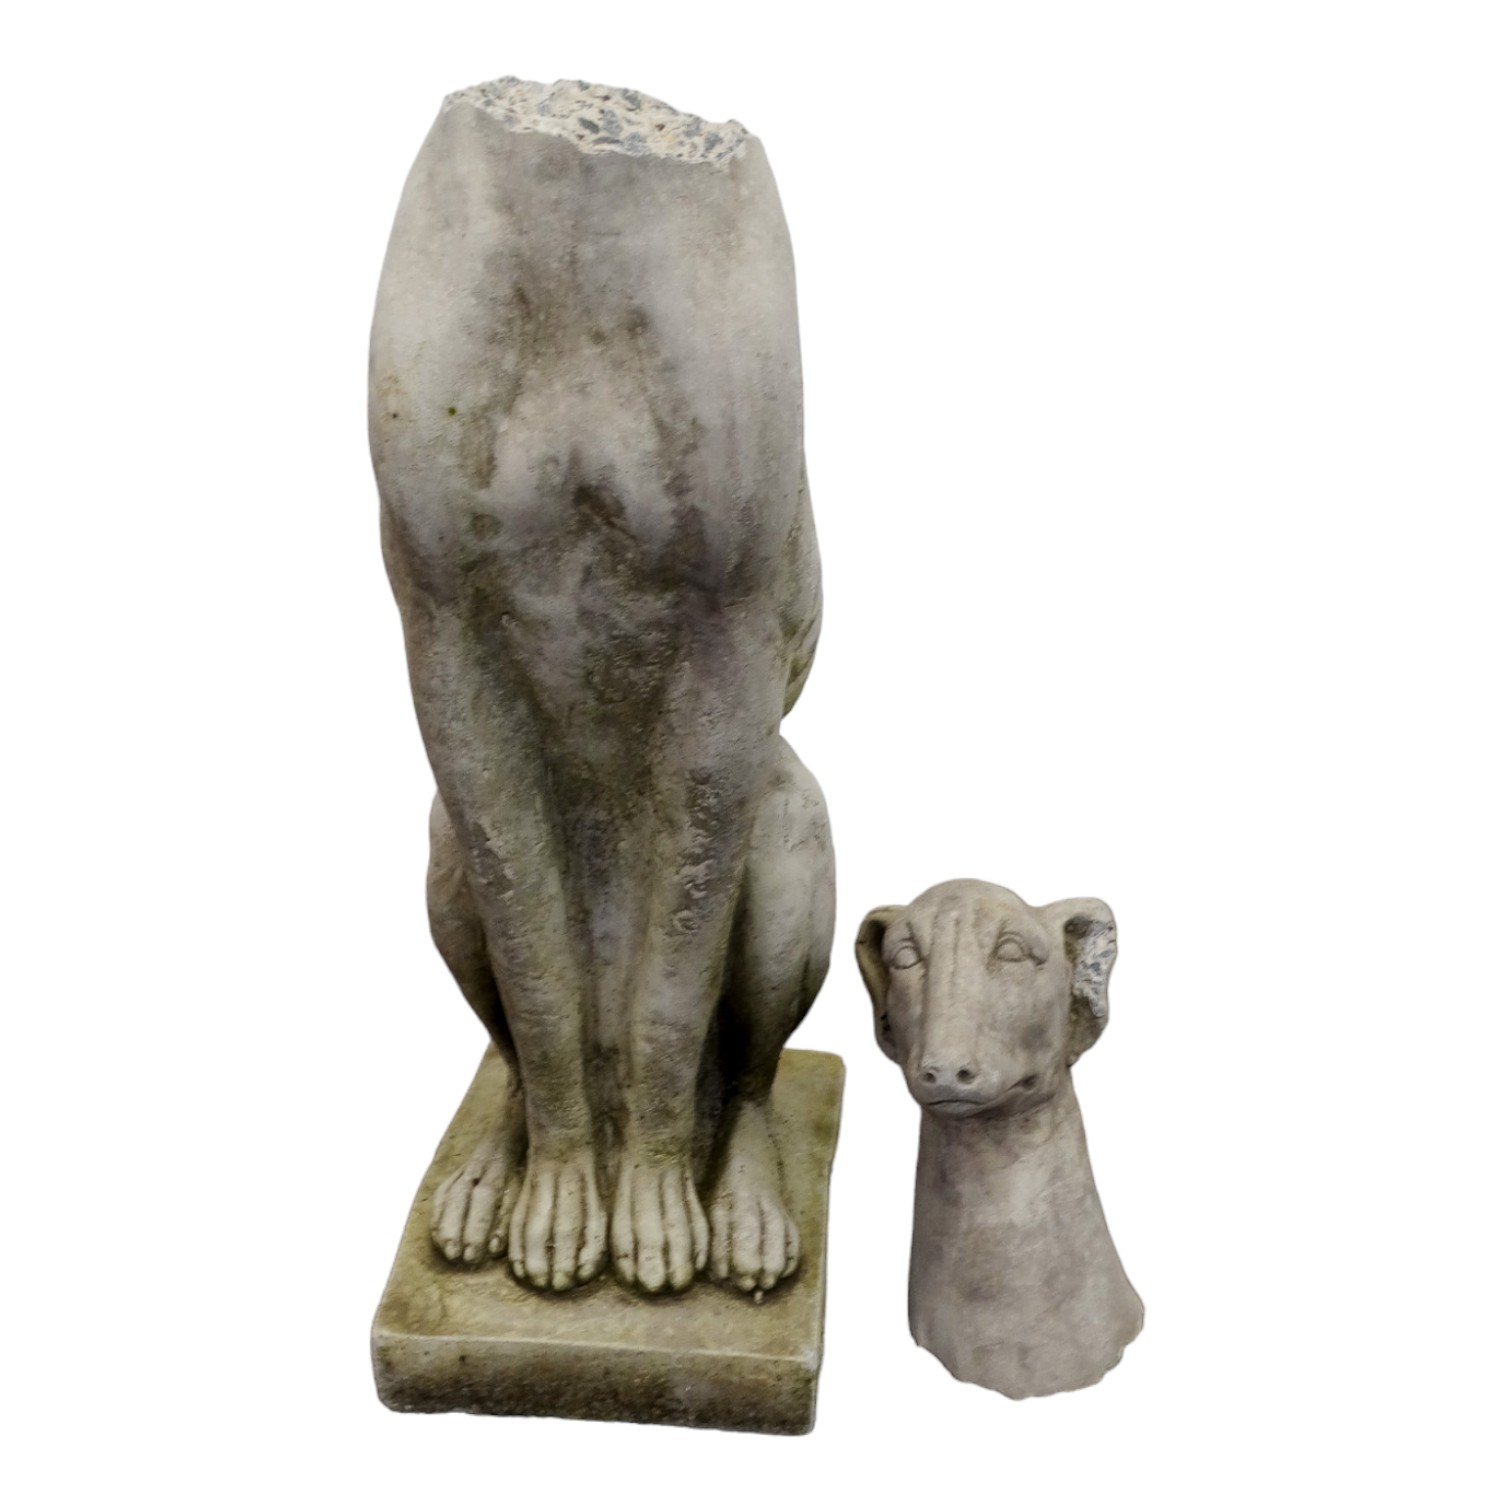 Pair of reconstituted stone dogs - seated alert pose, 55cm high - Image 5 of 10